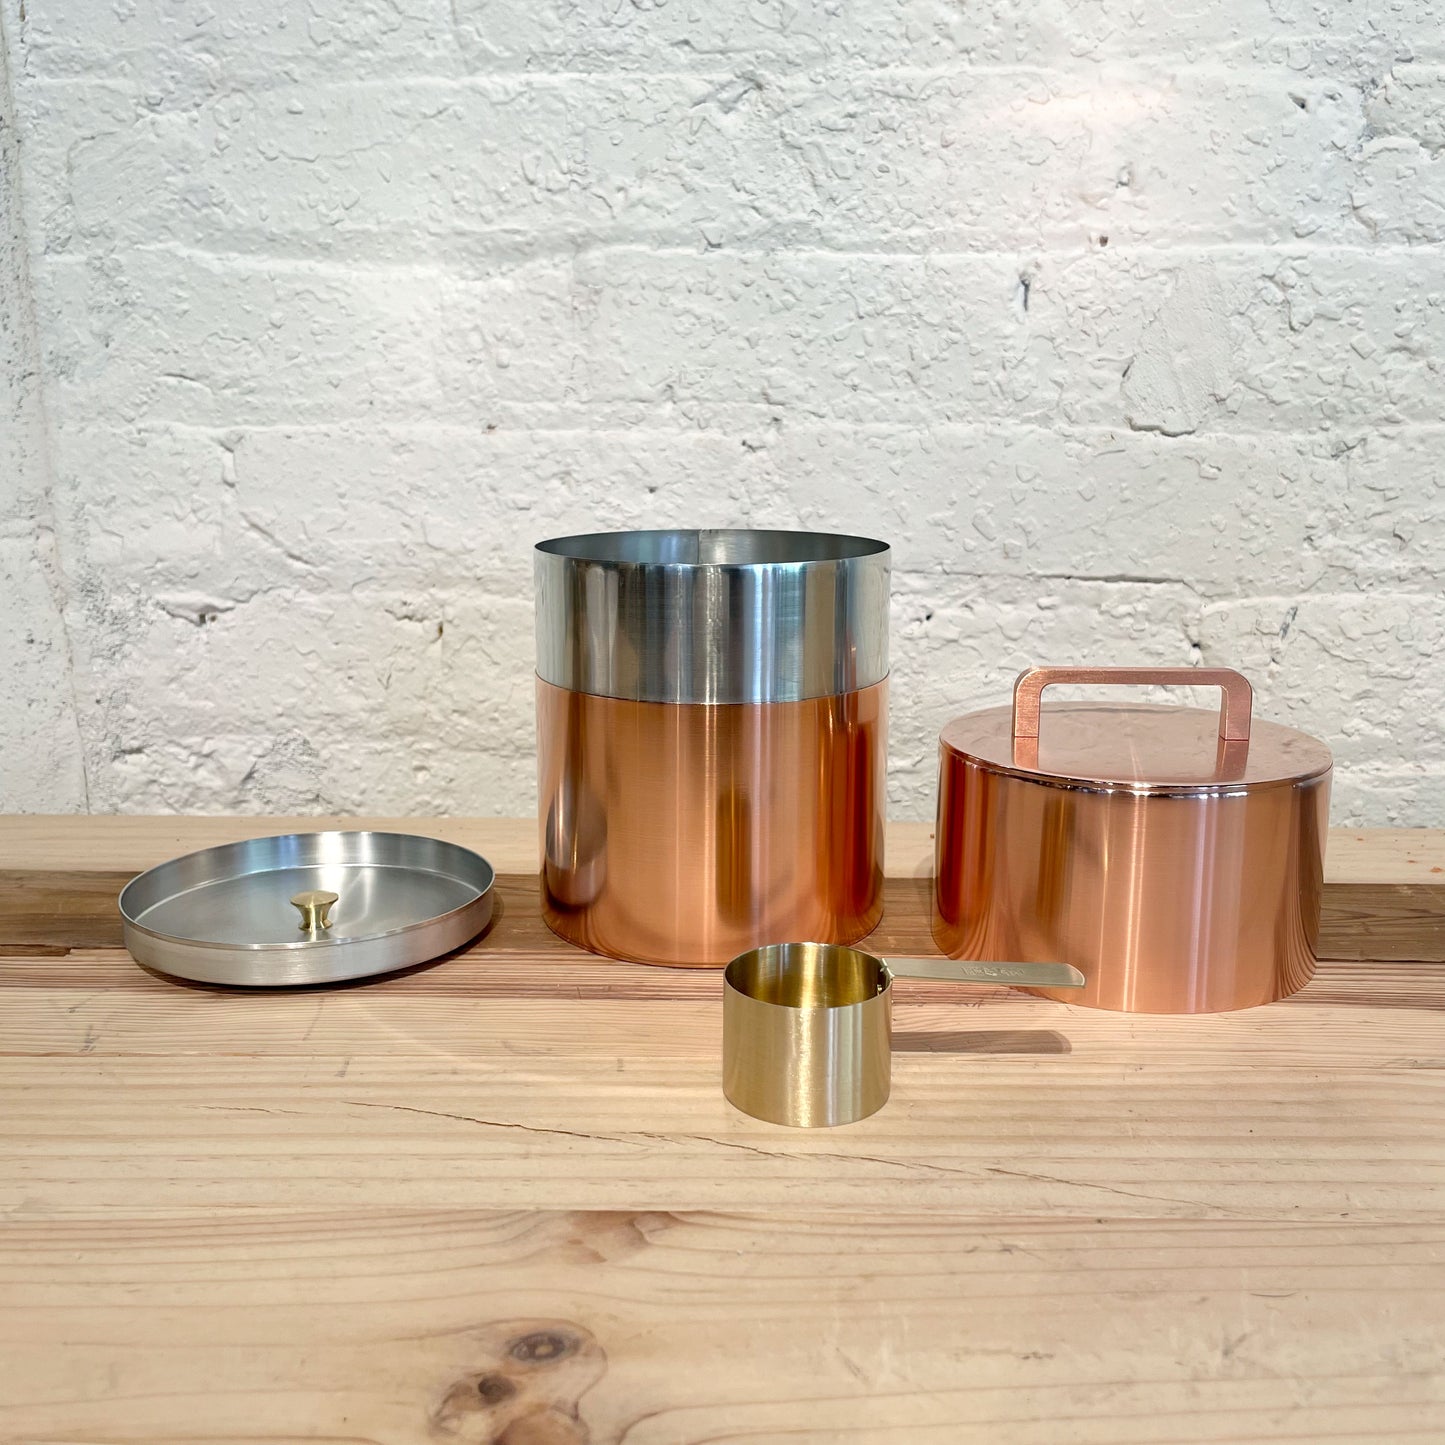 Copper Coffee Caddy 200gw/handle with coffee spoon